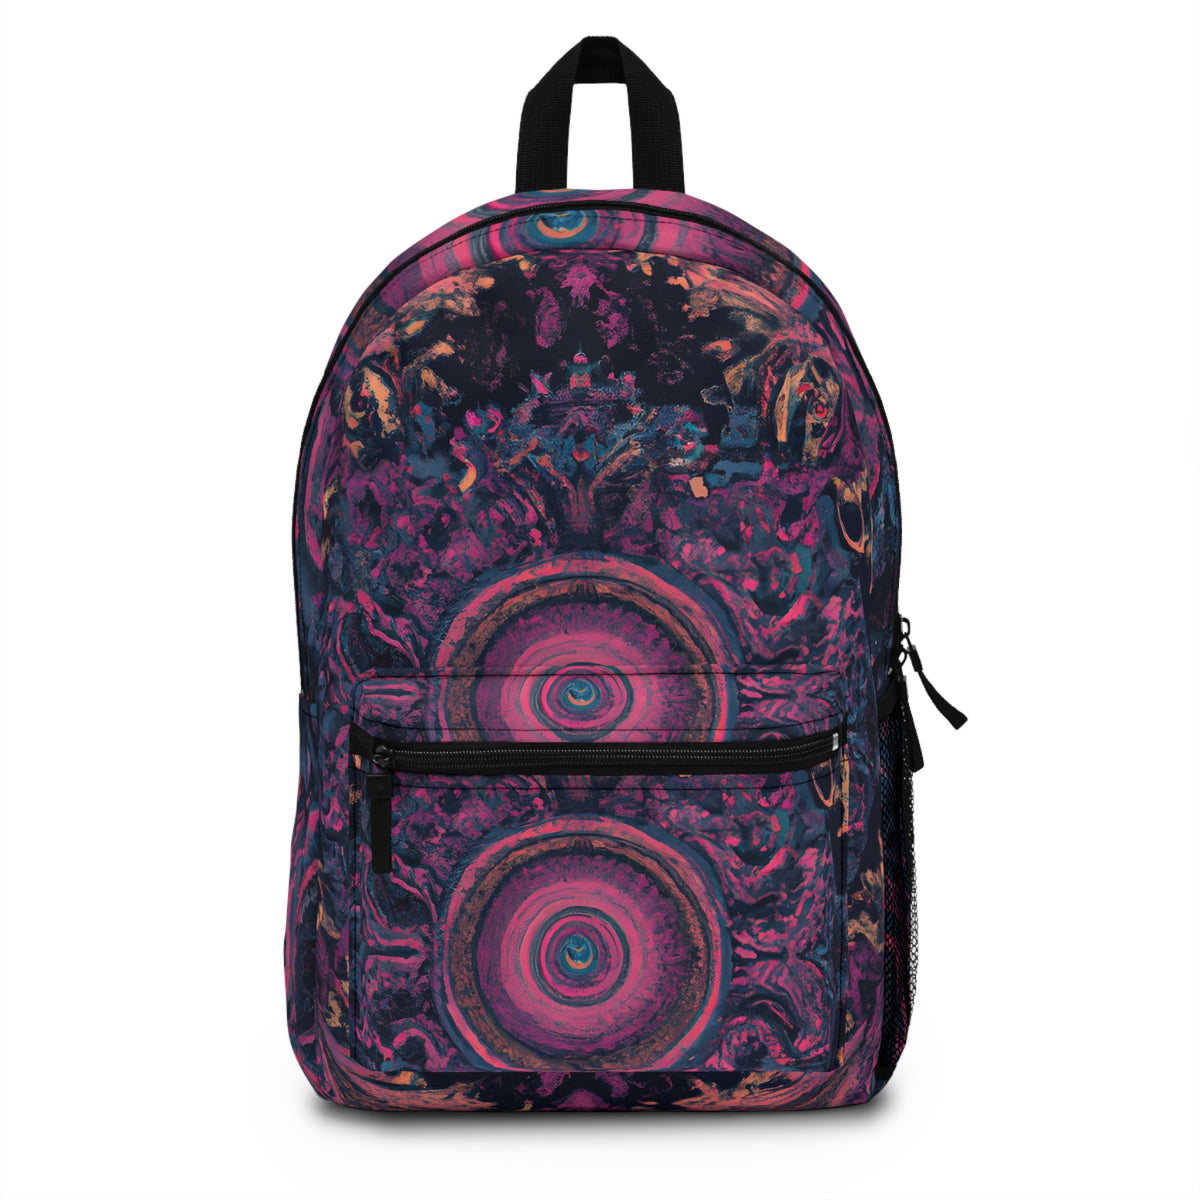 GlitterDazzle - Gay-Inspired Backpack